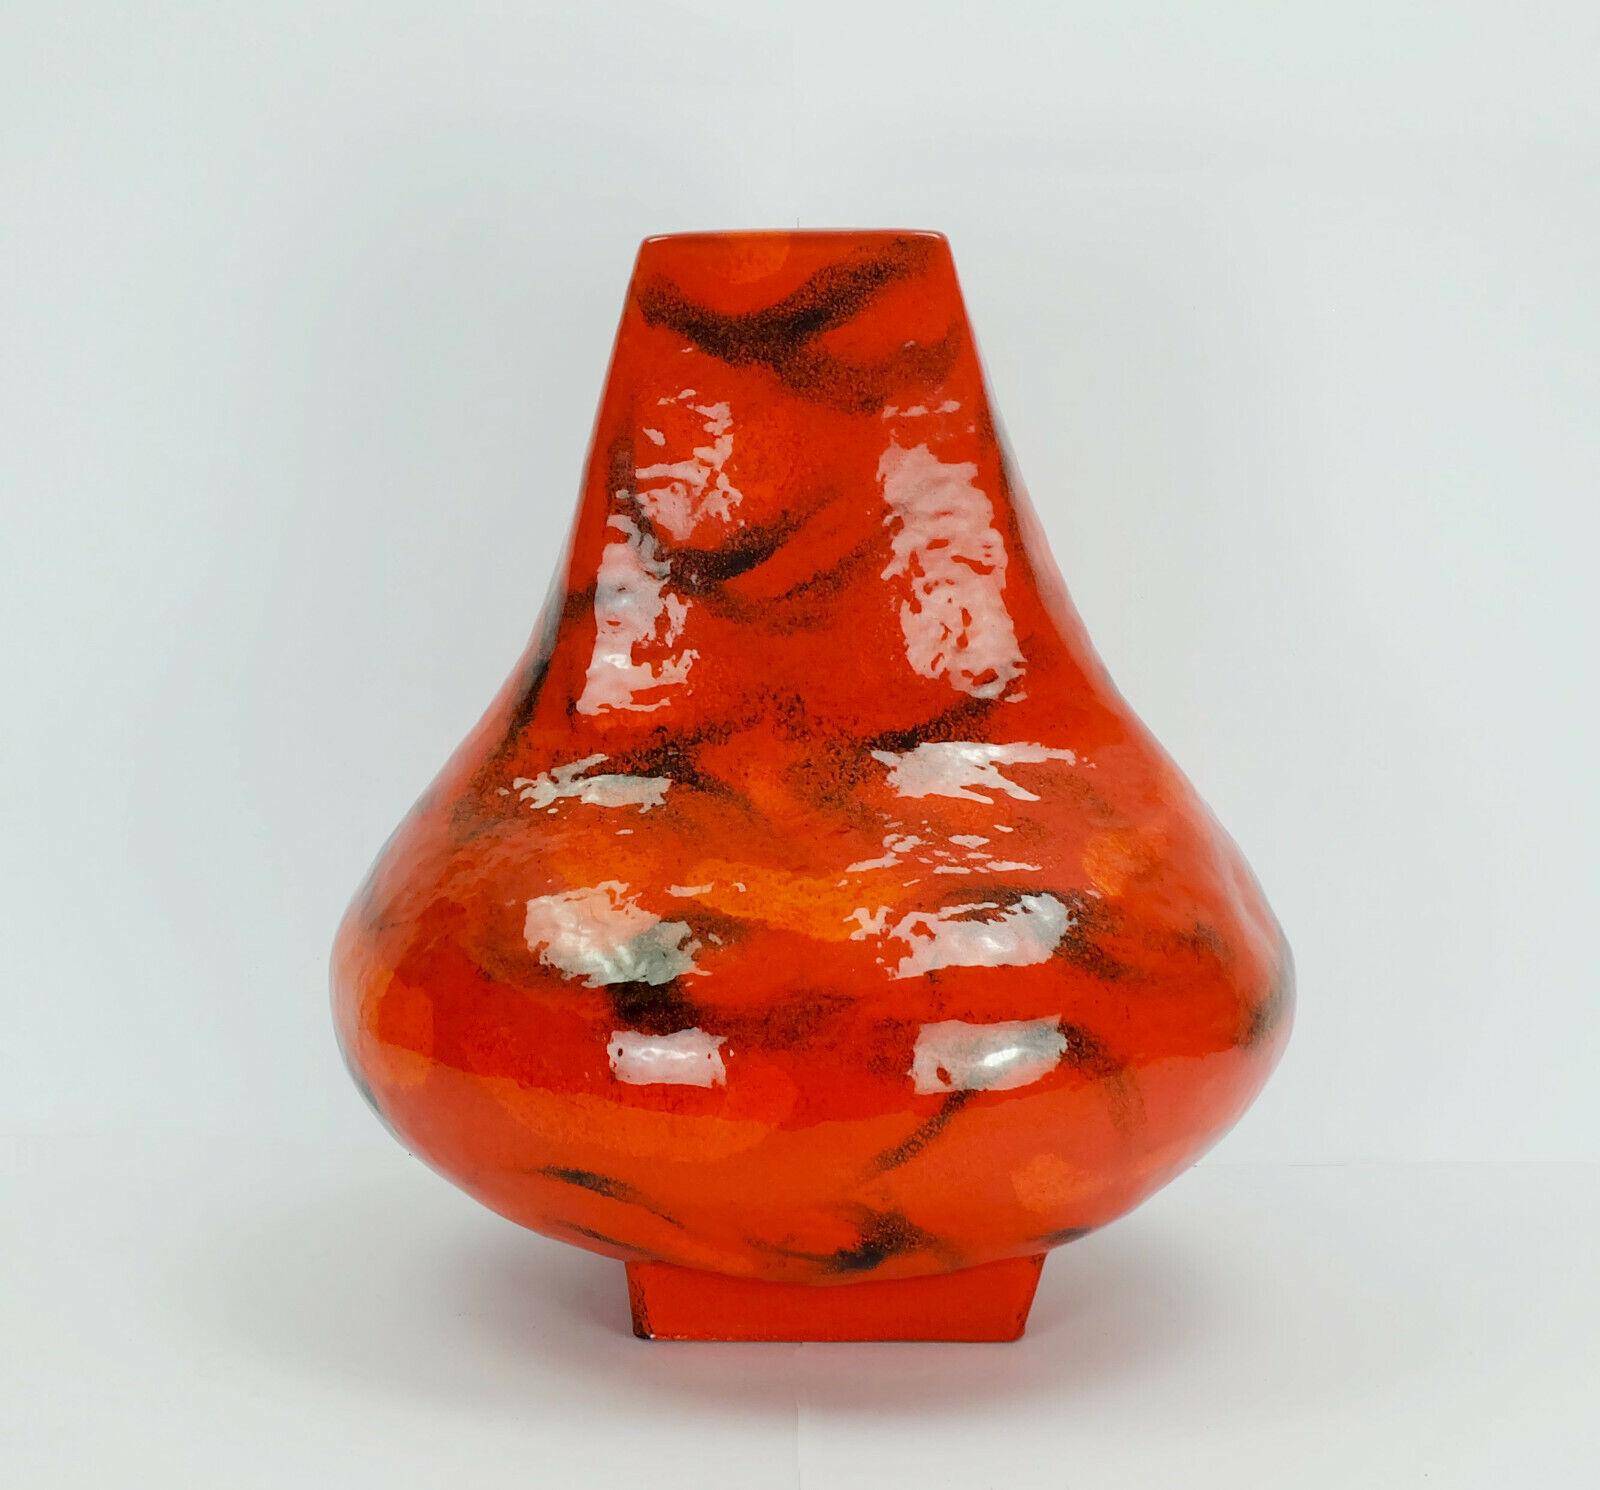 Very rare and huge 1970s ceramic floorvase. Designed by Lilo Pragher for Karlsruher Majolika. Model 7573. Intense red glaze with abstract pattern in orange and black.

Height 19 3/4